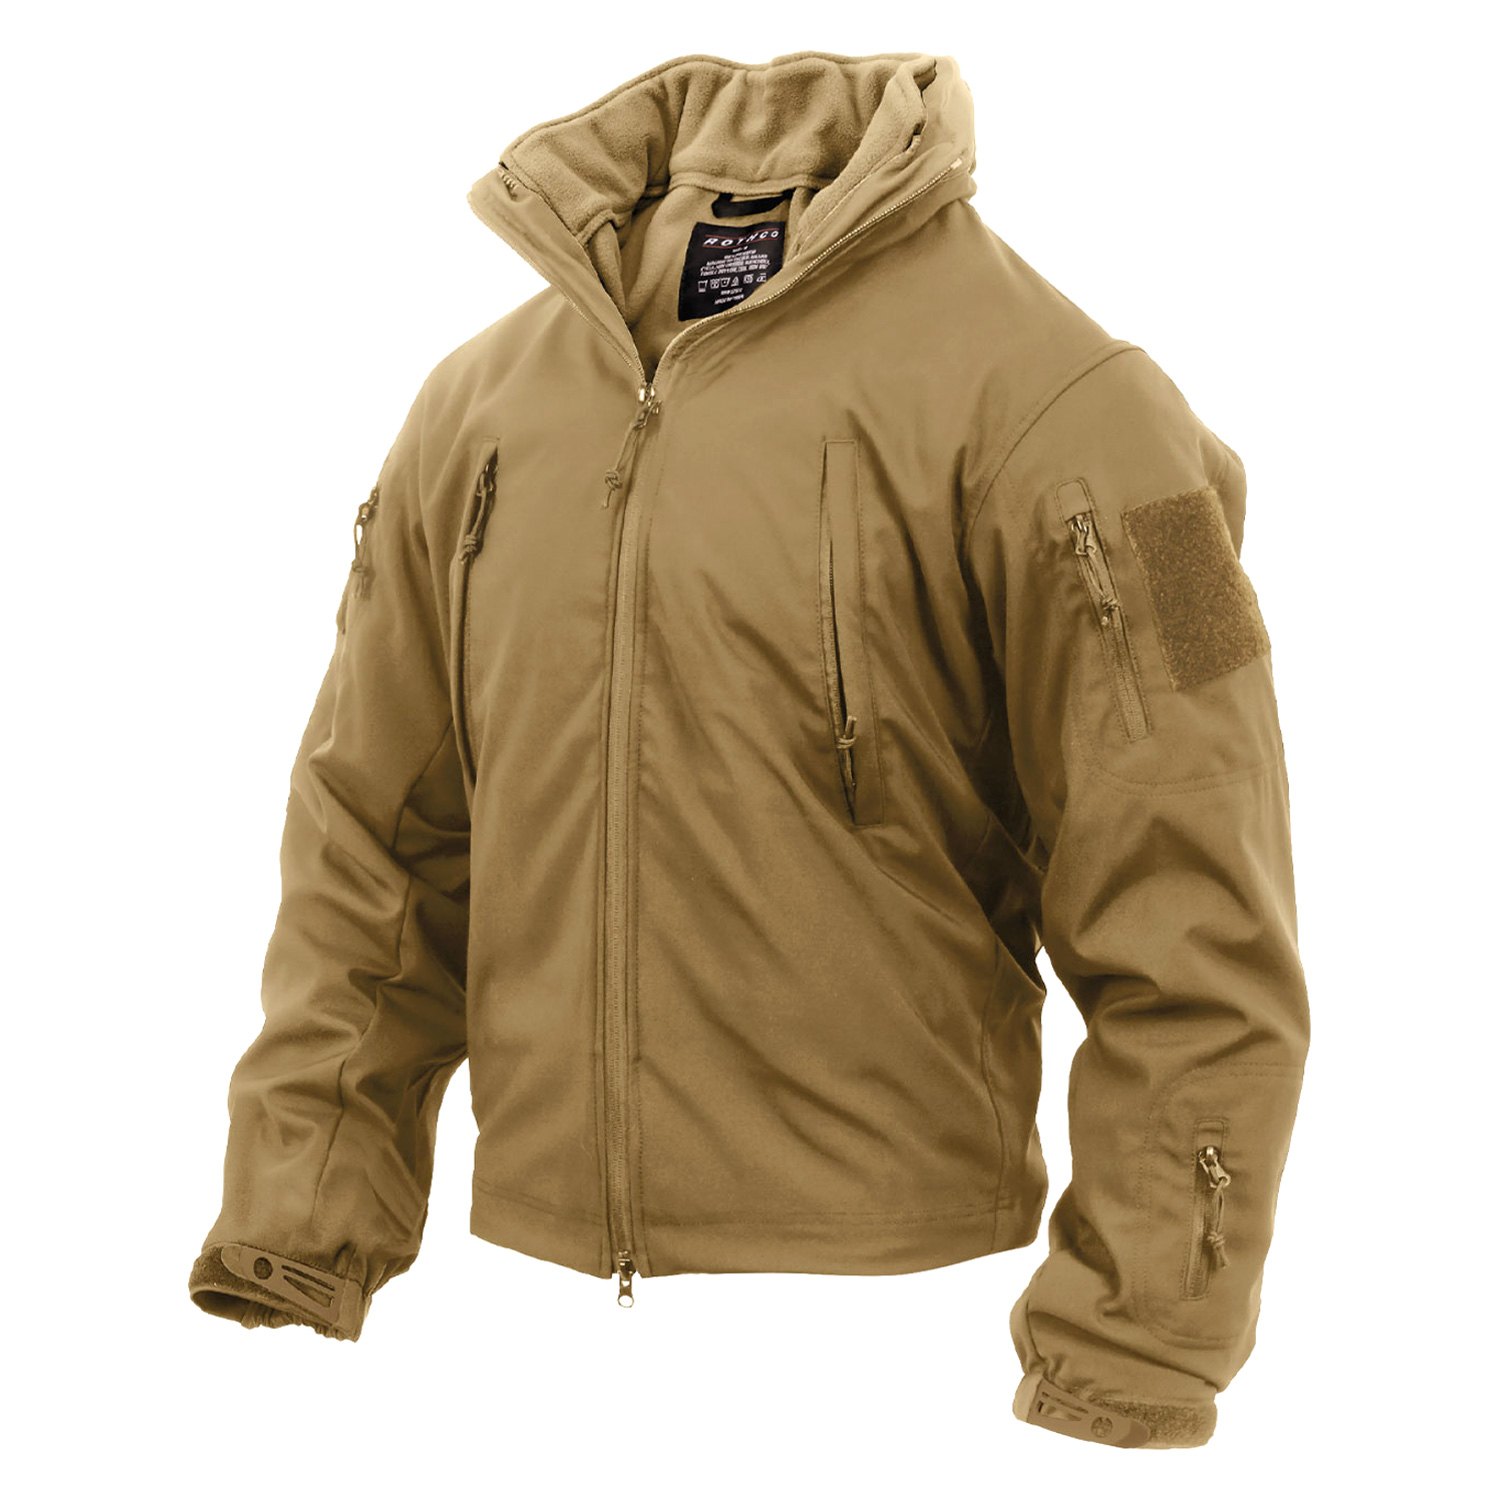 Rothco® 3128-Coyote Brown-M - 3-in-1 Special Ops Men's Medium Coyote ...